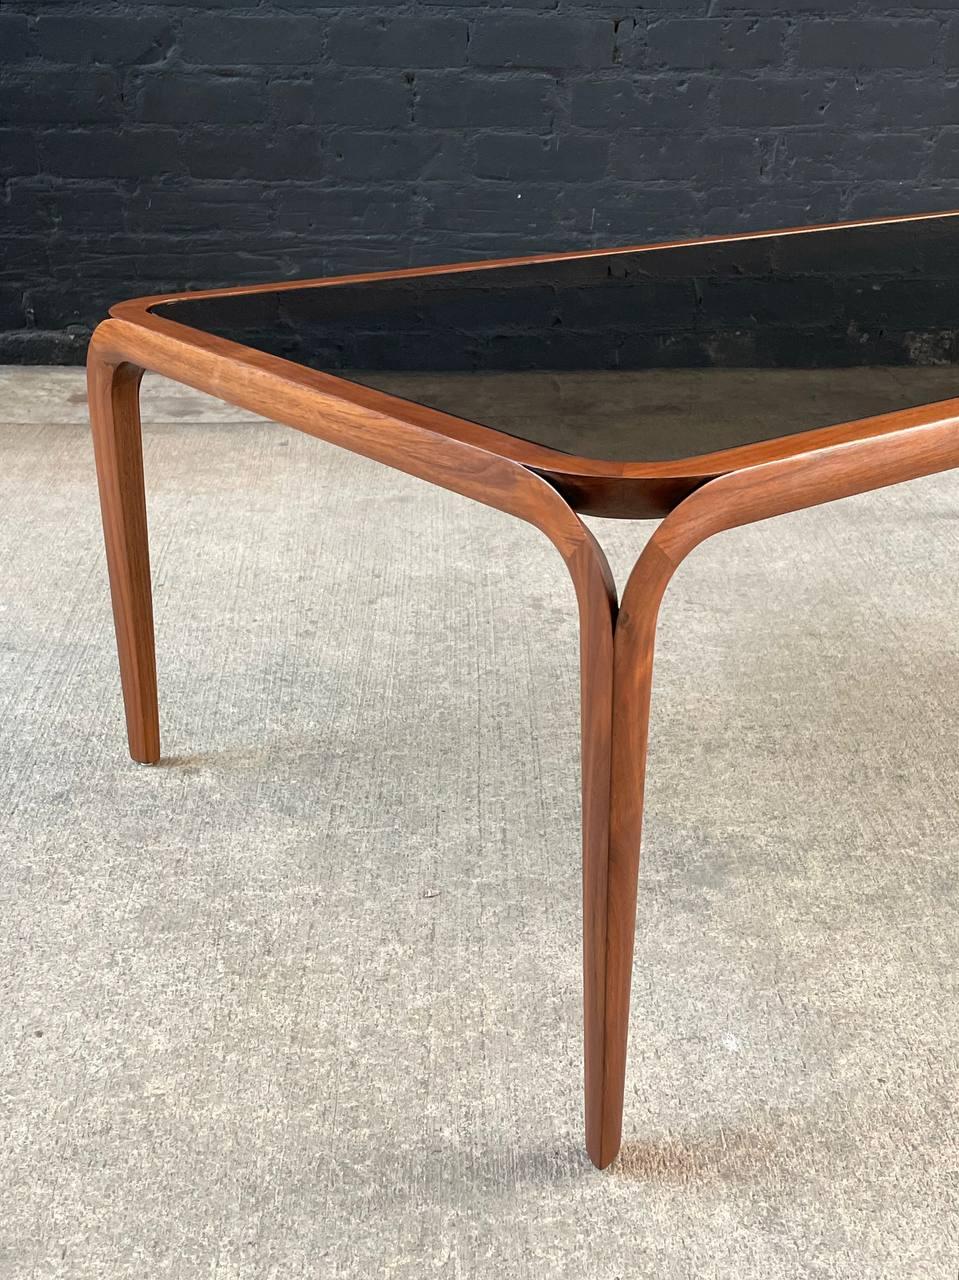 Newly Refinished - Mid-Century Modern Sculpted Walnut & Smoke Glass Coffee Table 1